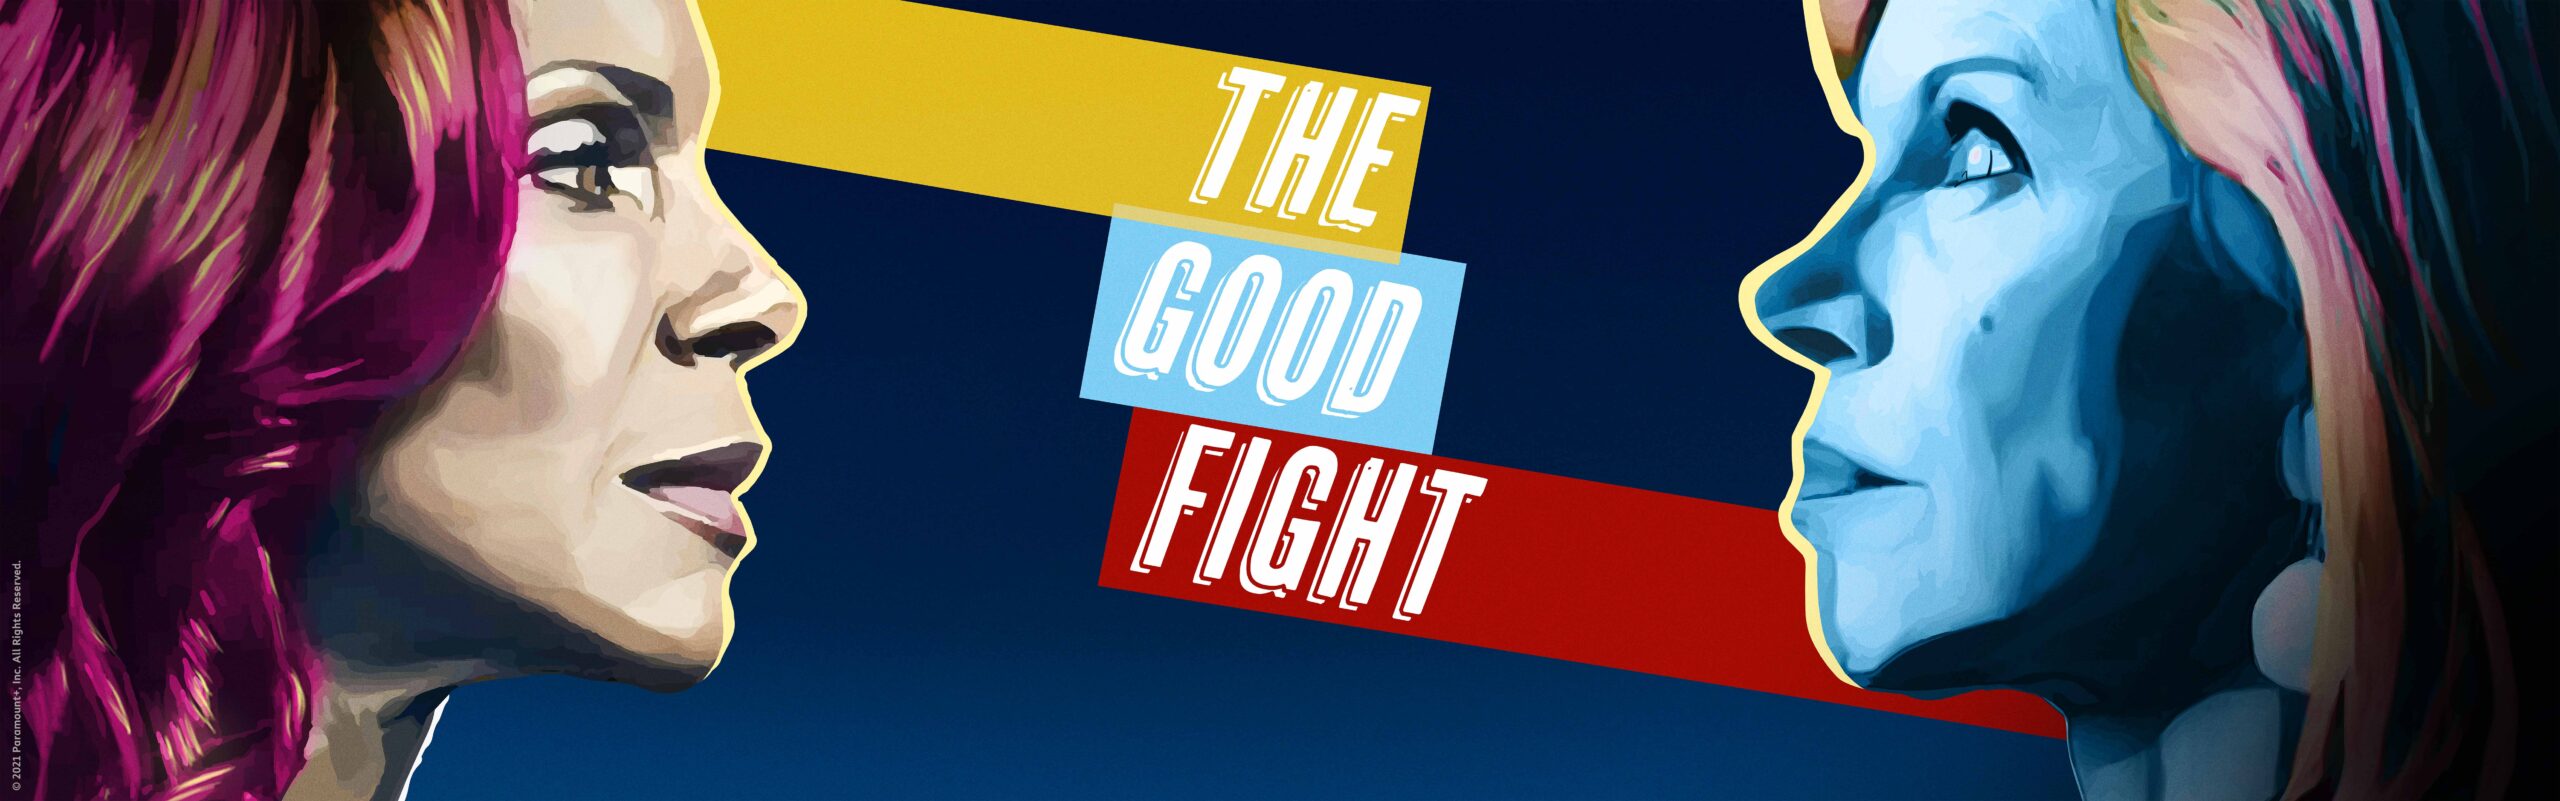 Poster The Good Fight (stagione 5) [credit: courtesy of TIMvision]